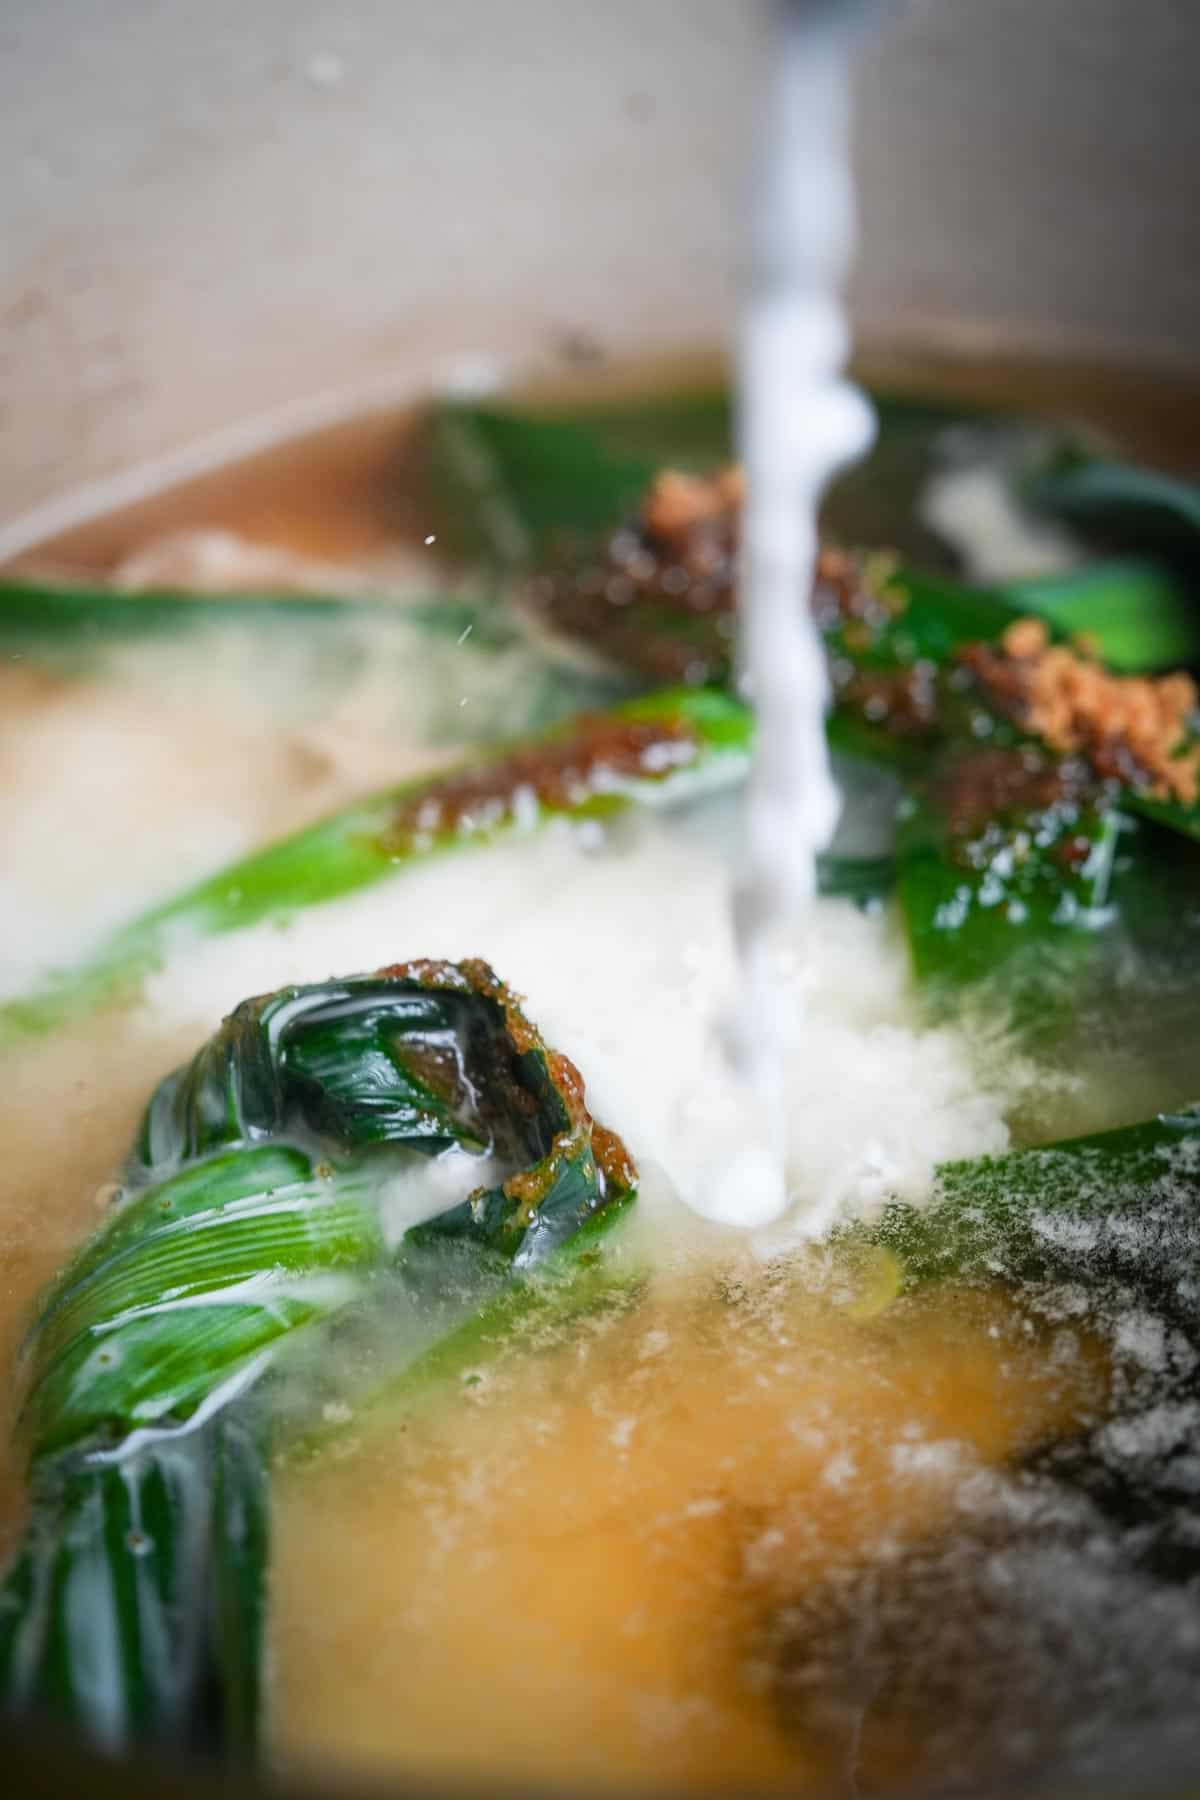 Coconut milk being poured into the pot of boiling pandan leaves.